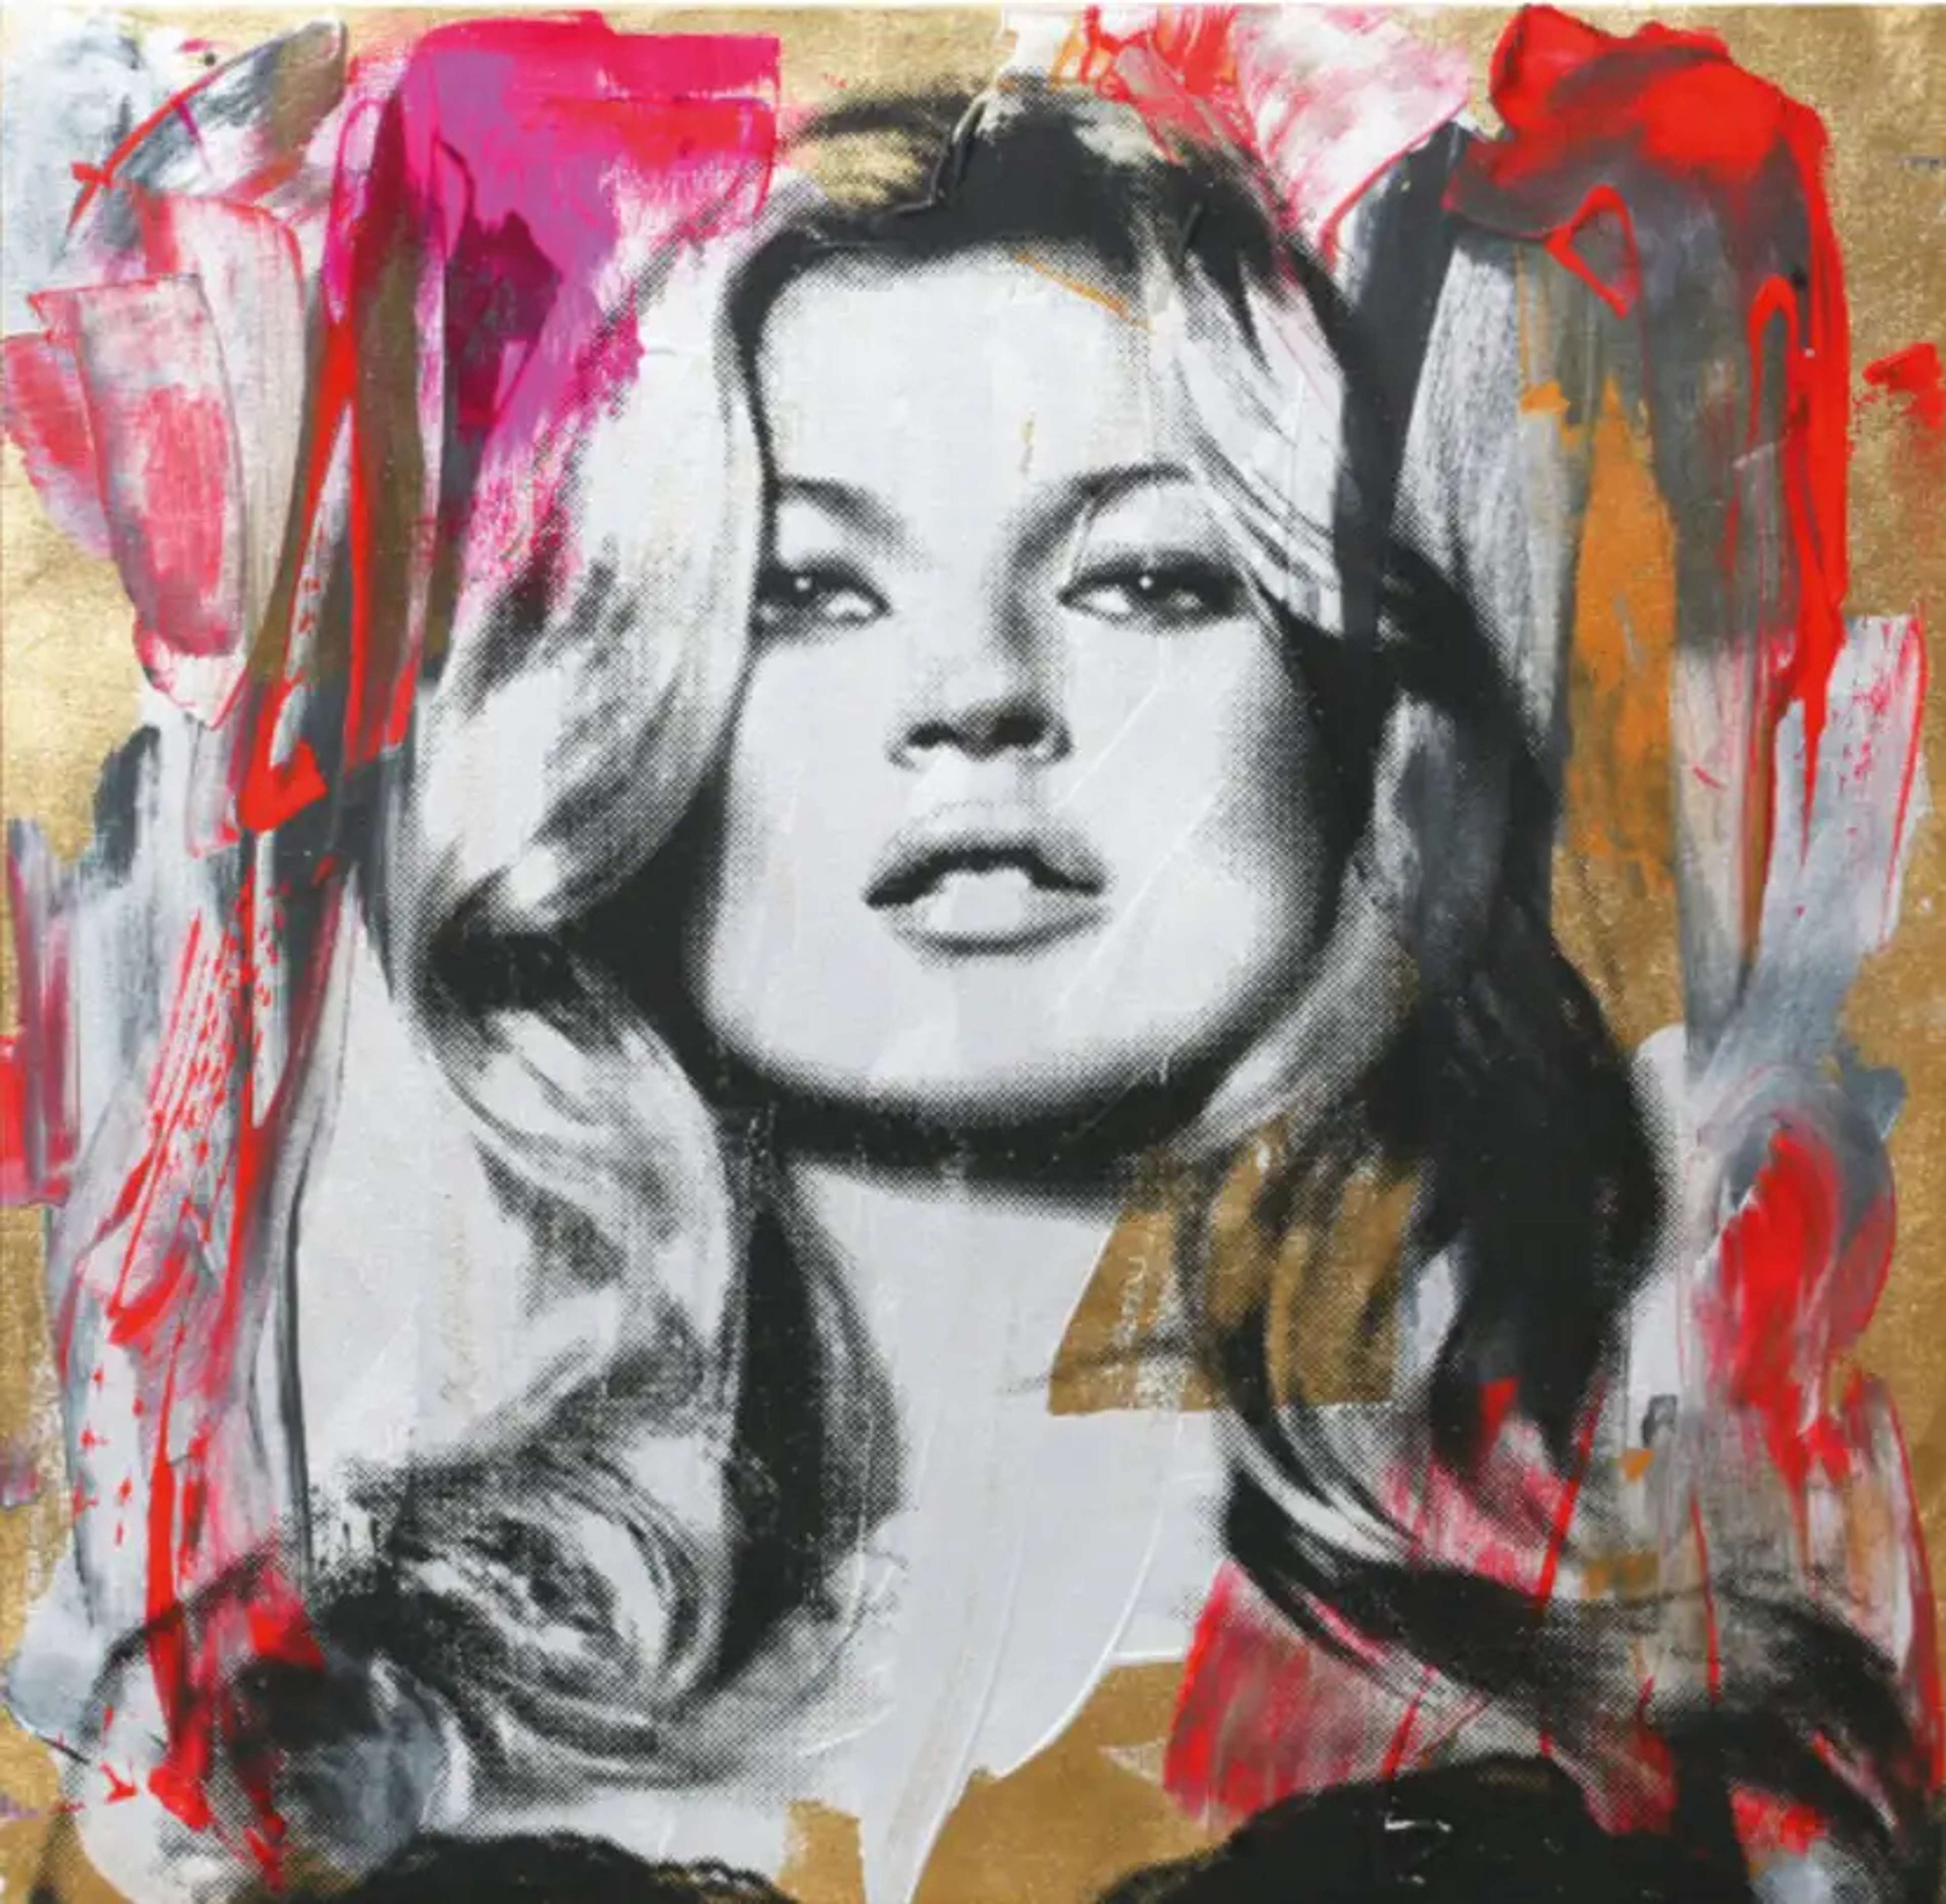 A black and white spray-painted stencil of British model Kate Moss, surrounded by spray-painted splotches and dripping pink and orange paint.